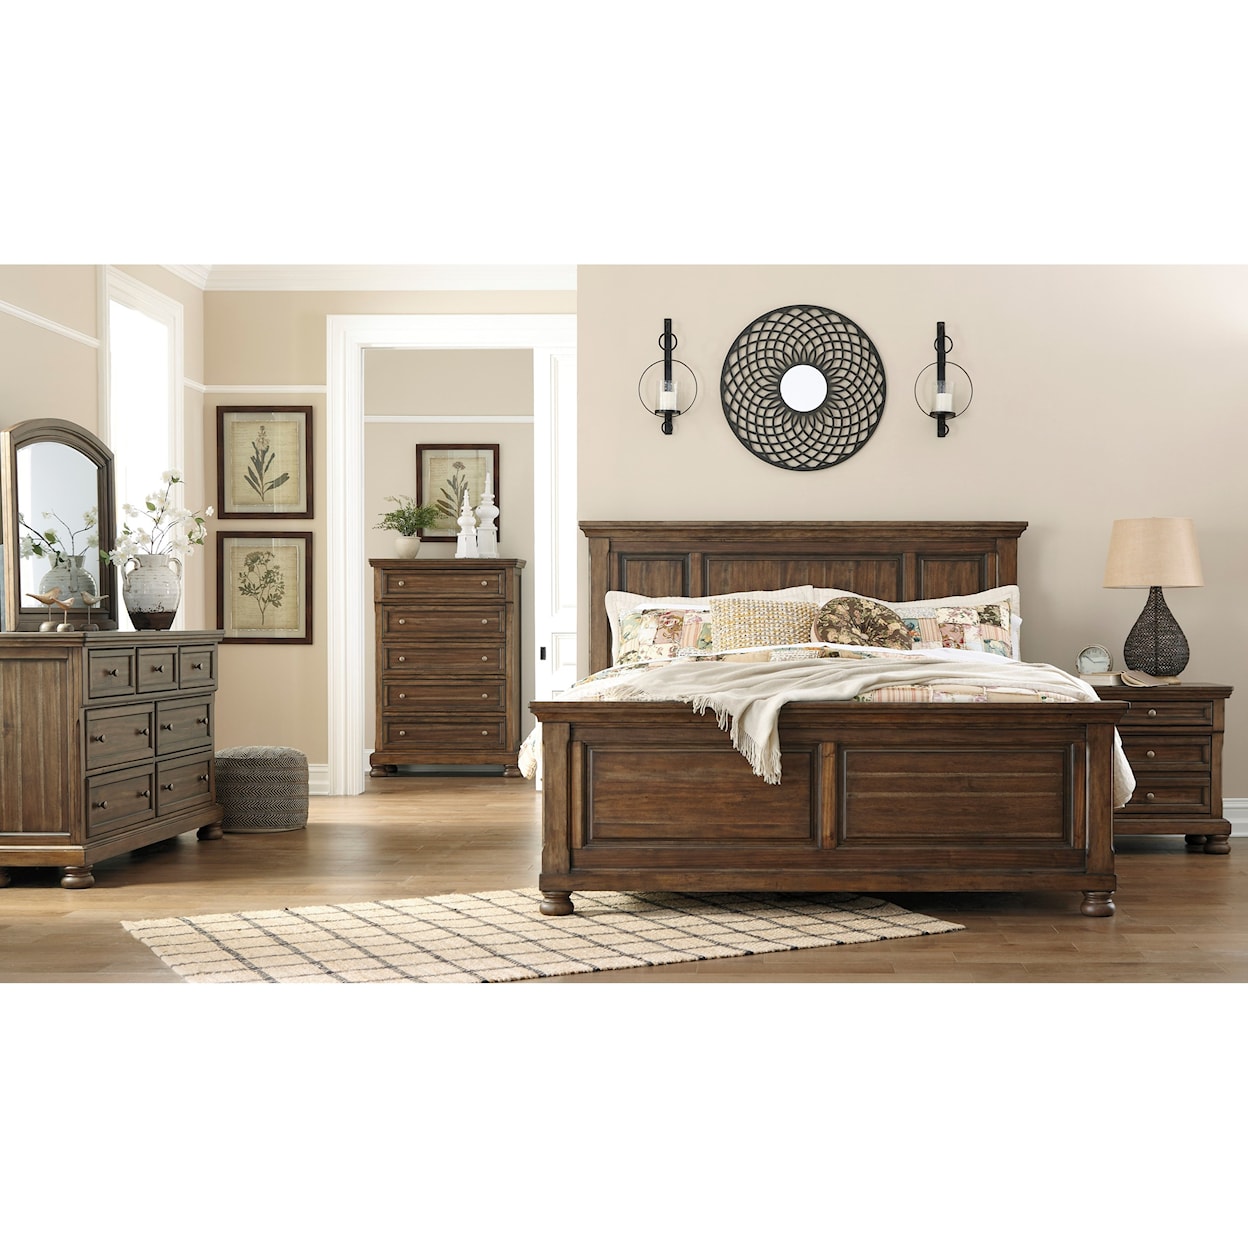 Signature Design by Ashley Flynnter California King Panel Bed